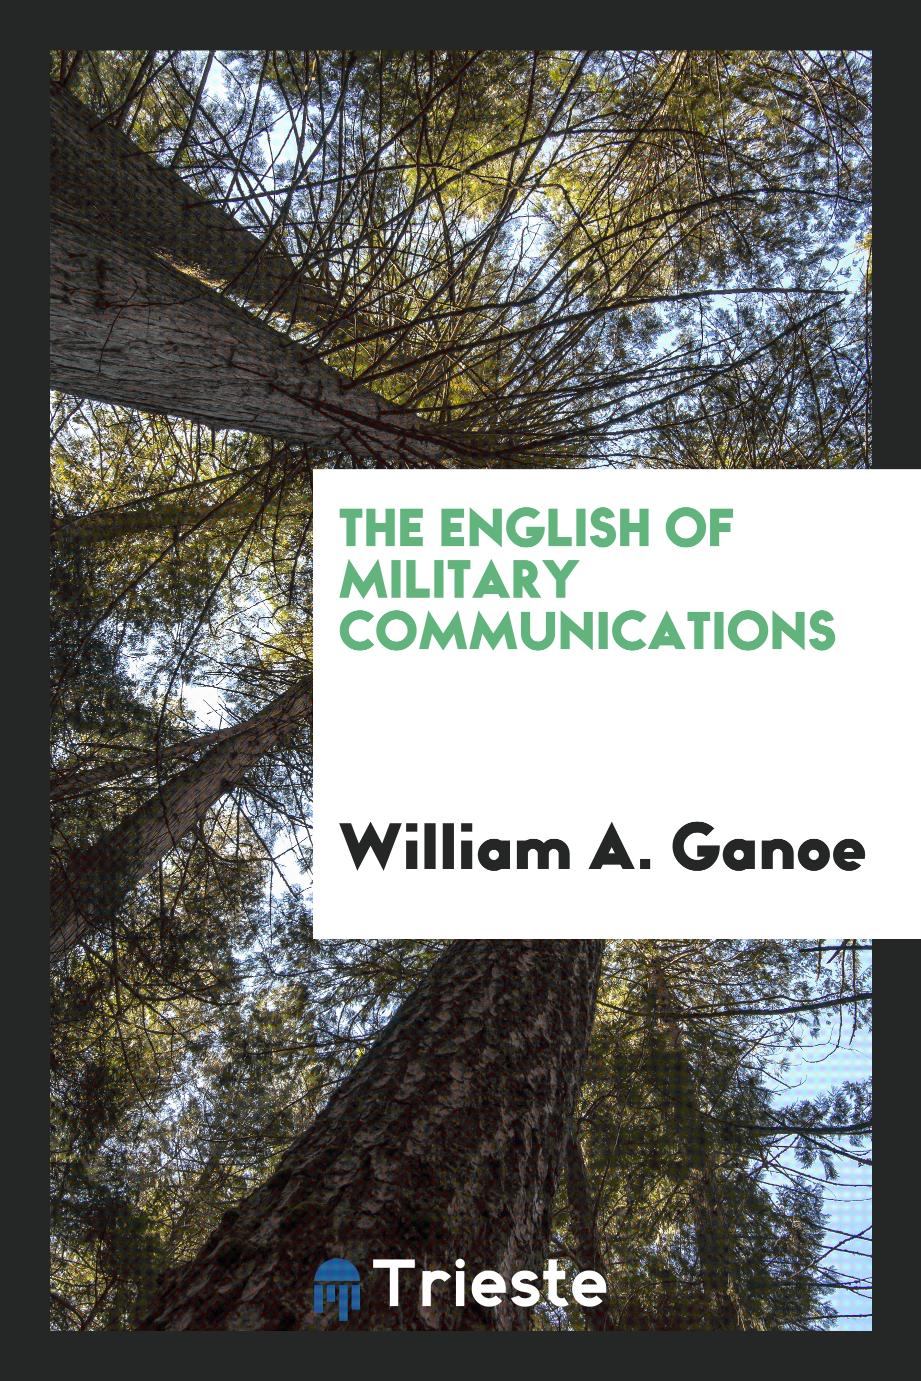 The English of military communications